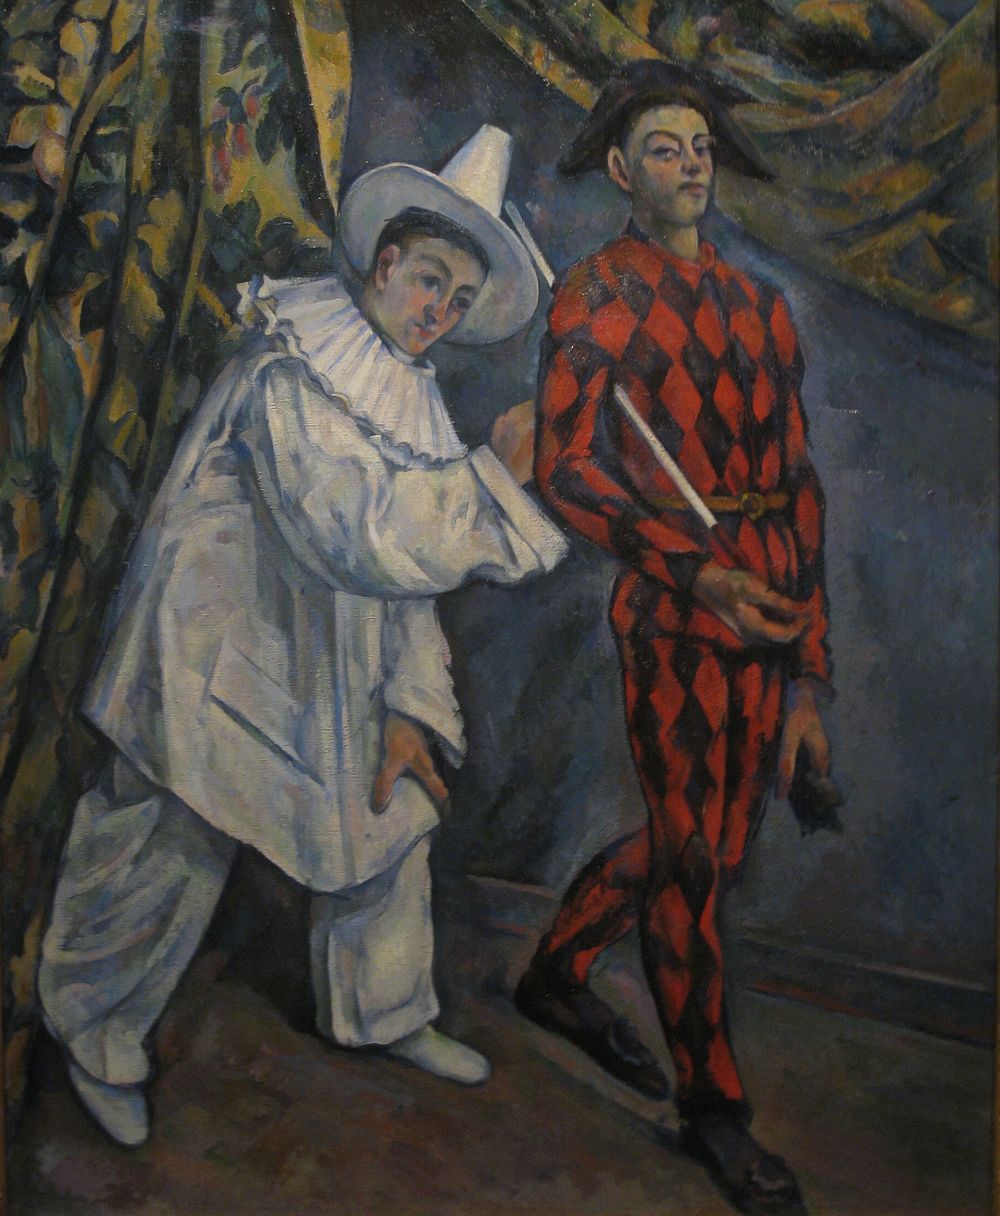 Paul C&eacute;zanne's Pierot and Harlequin (Mardi Gras) (1895) famous painting. Original from Wikimedia Commons. 